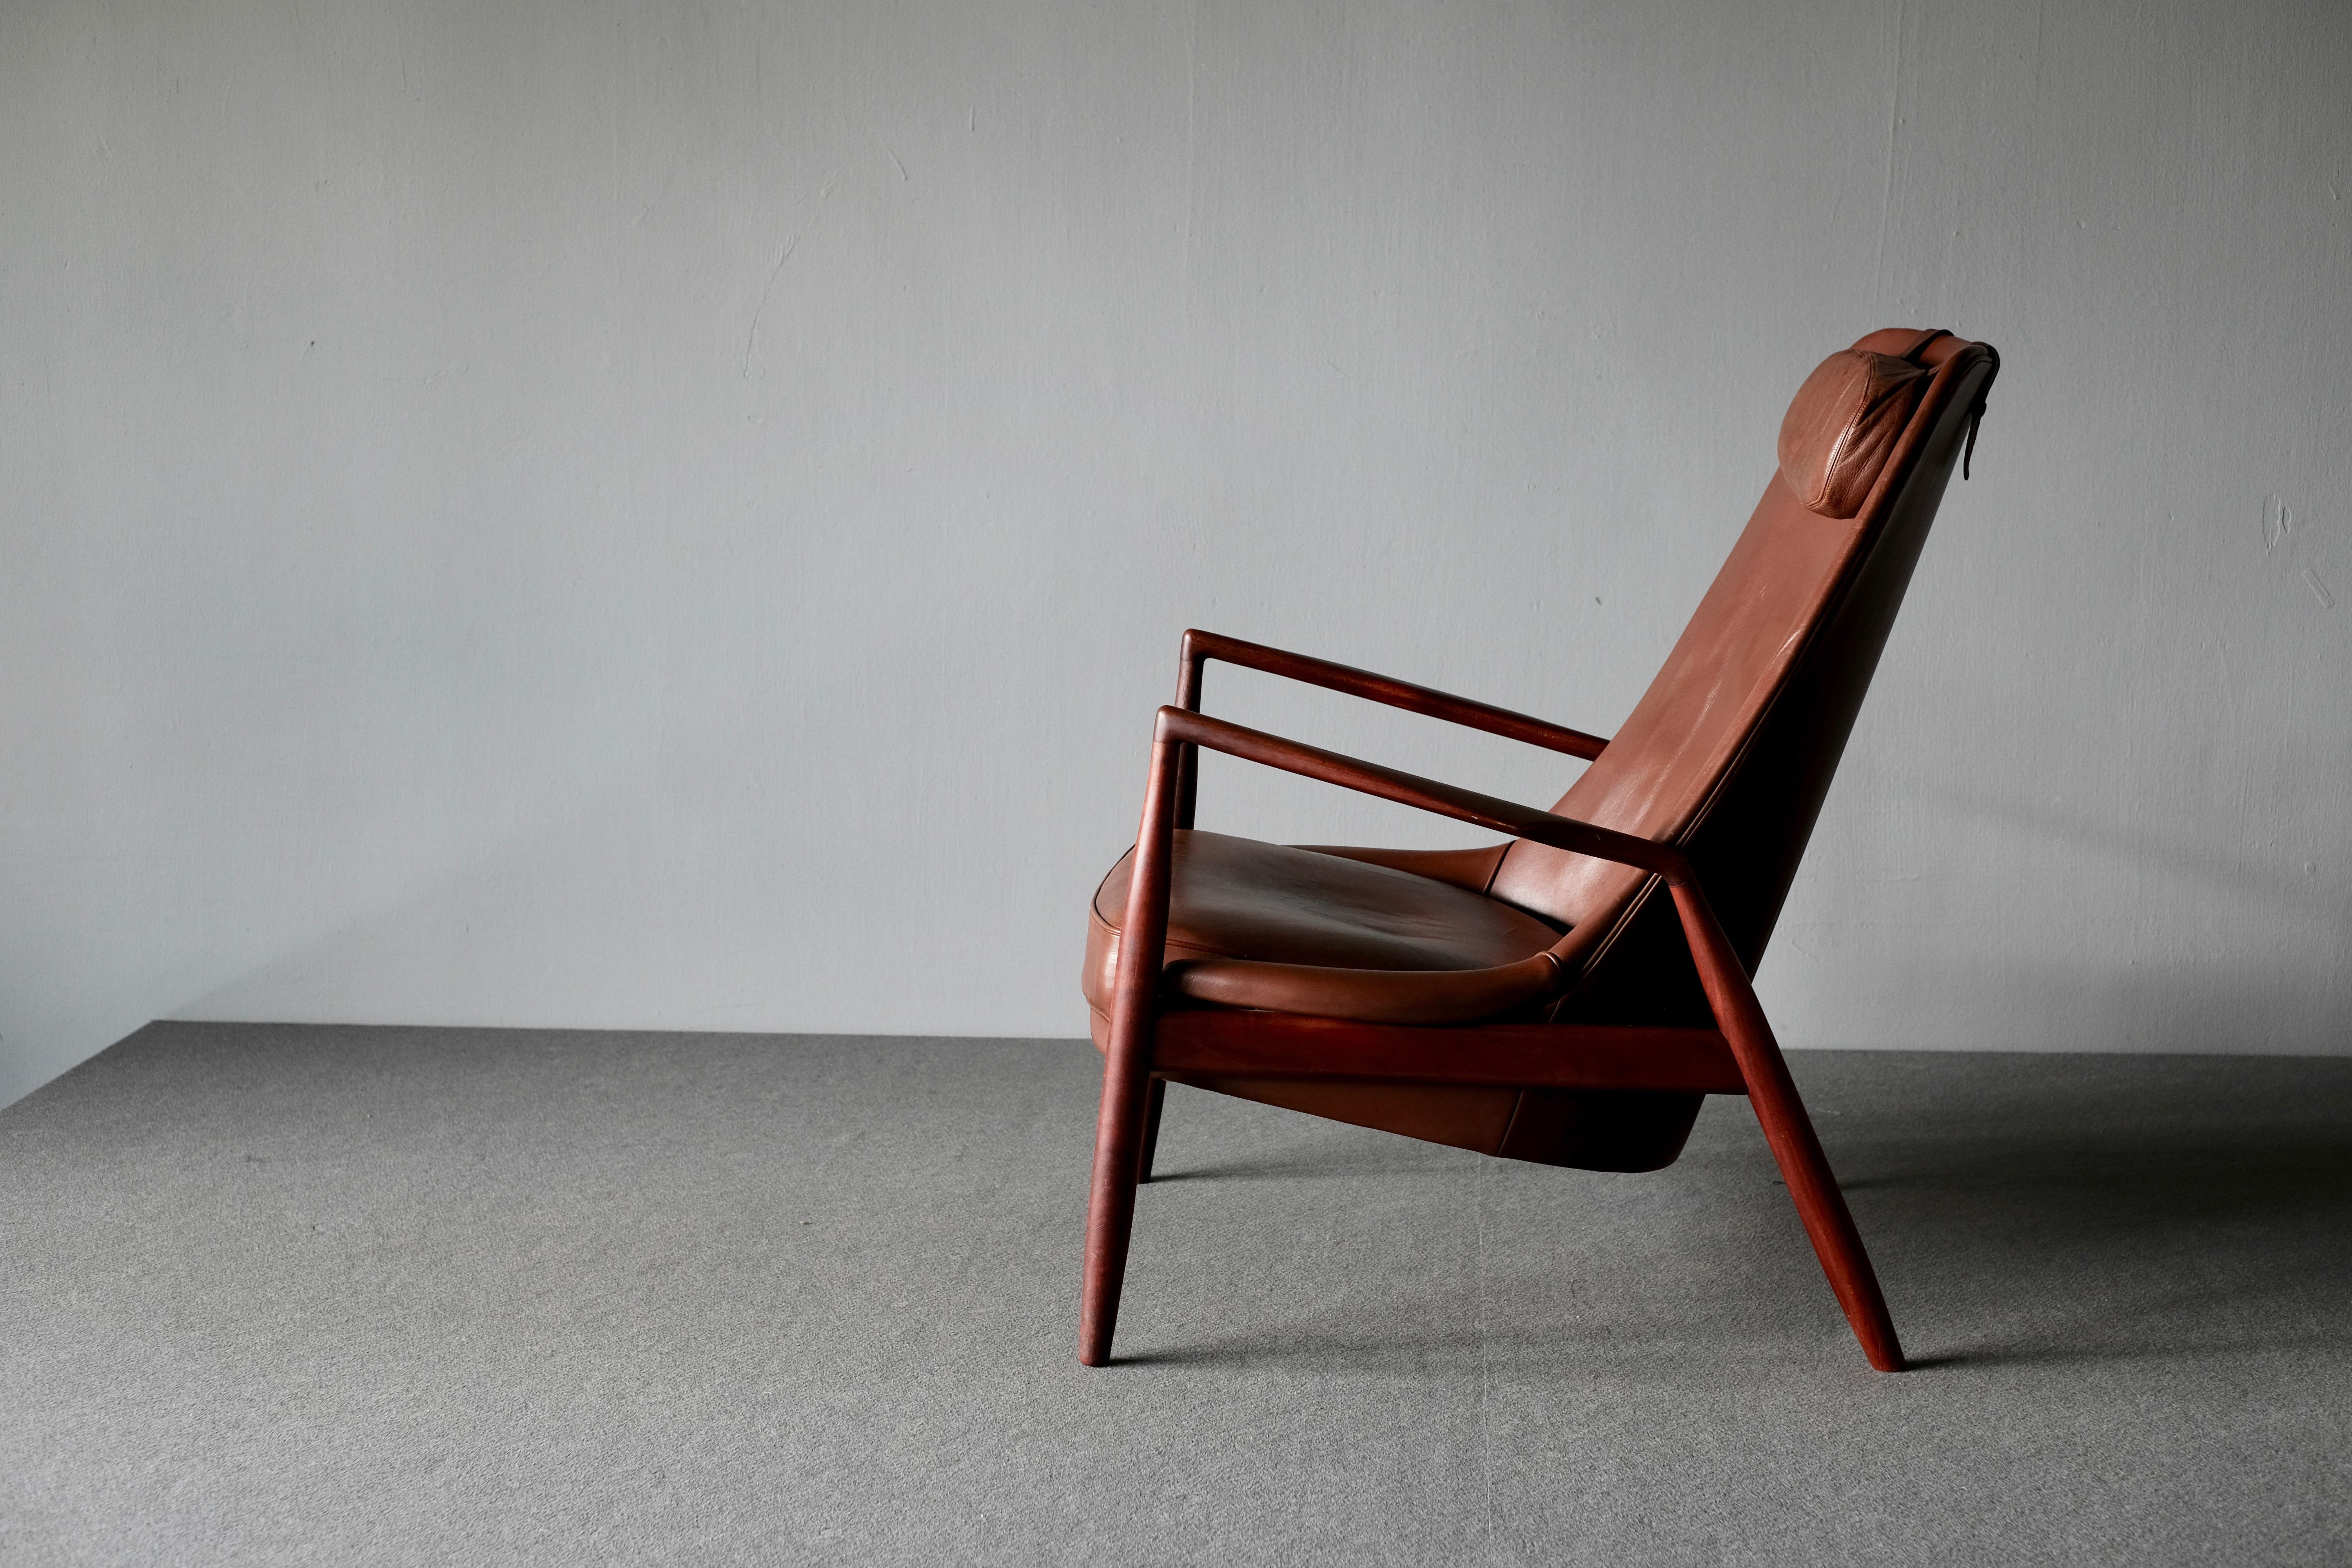 Rare and sought after high back lounge chair model 503-799 'Seal', in teak and leather by Ib Kofod-Larsen. Kofod-Larsen’s designs are appreciated by collectors the world over and are characterized by elegant lines and extraordinary craftsmanship.